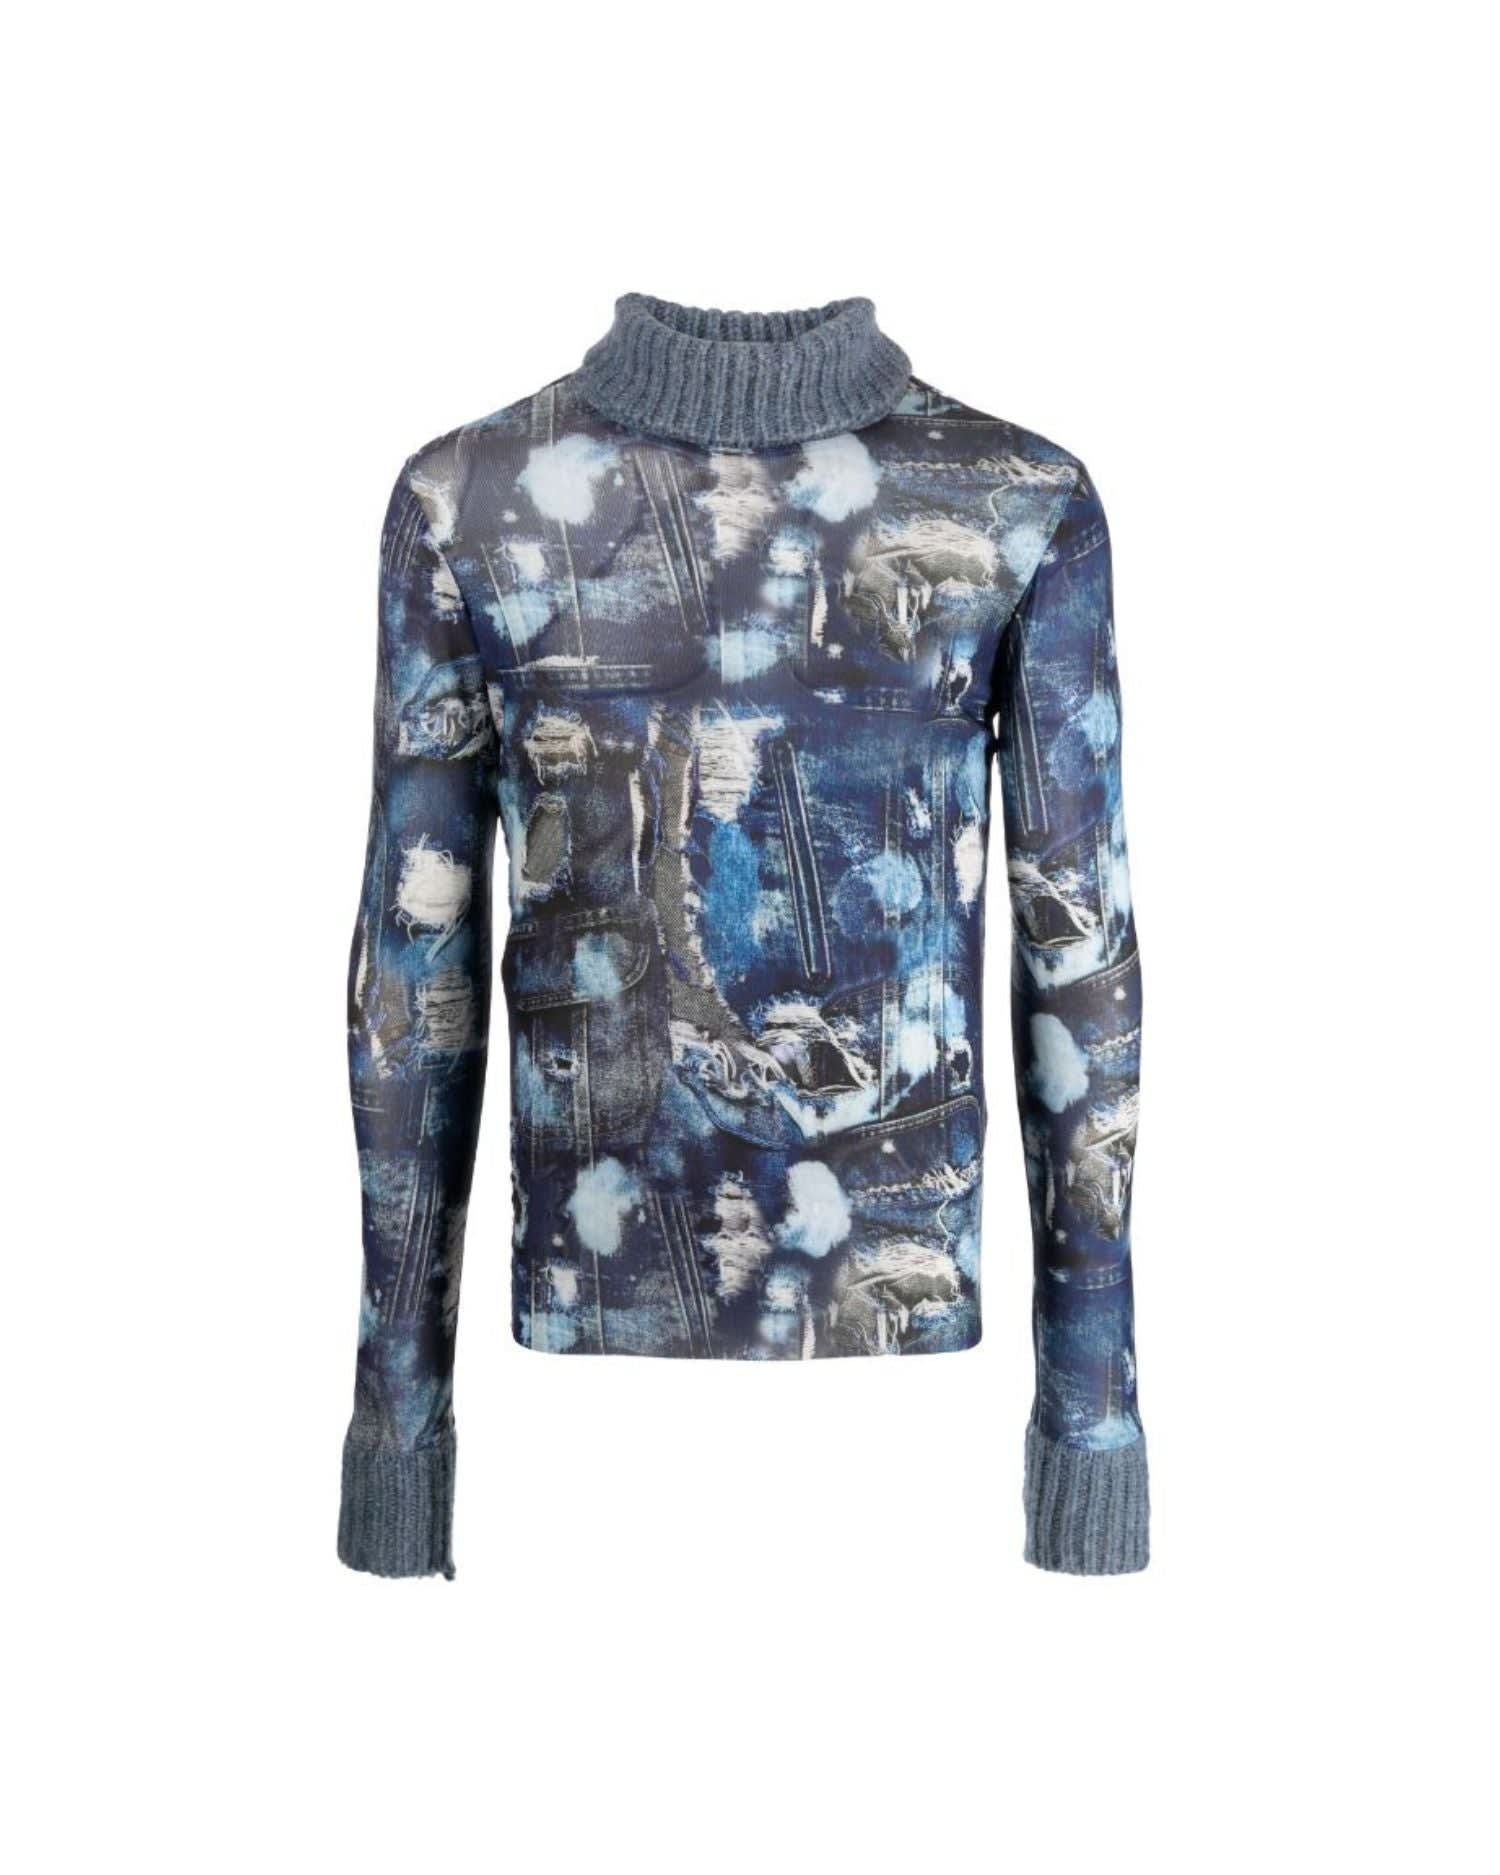 Turtleneck With Long Sleeves In Iconic Runway Denim-effect Pattern.